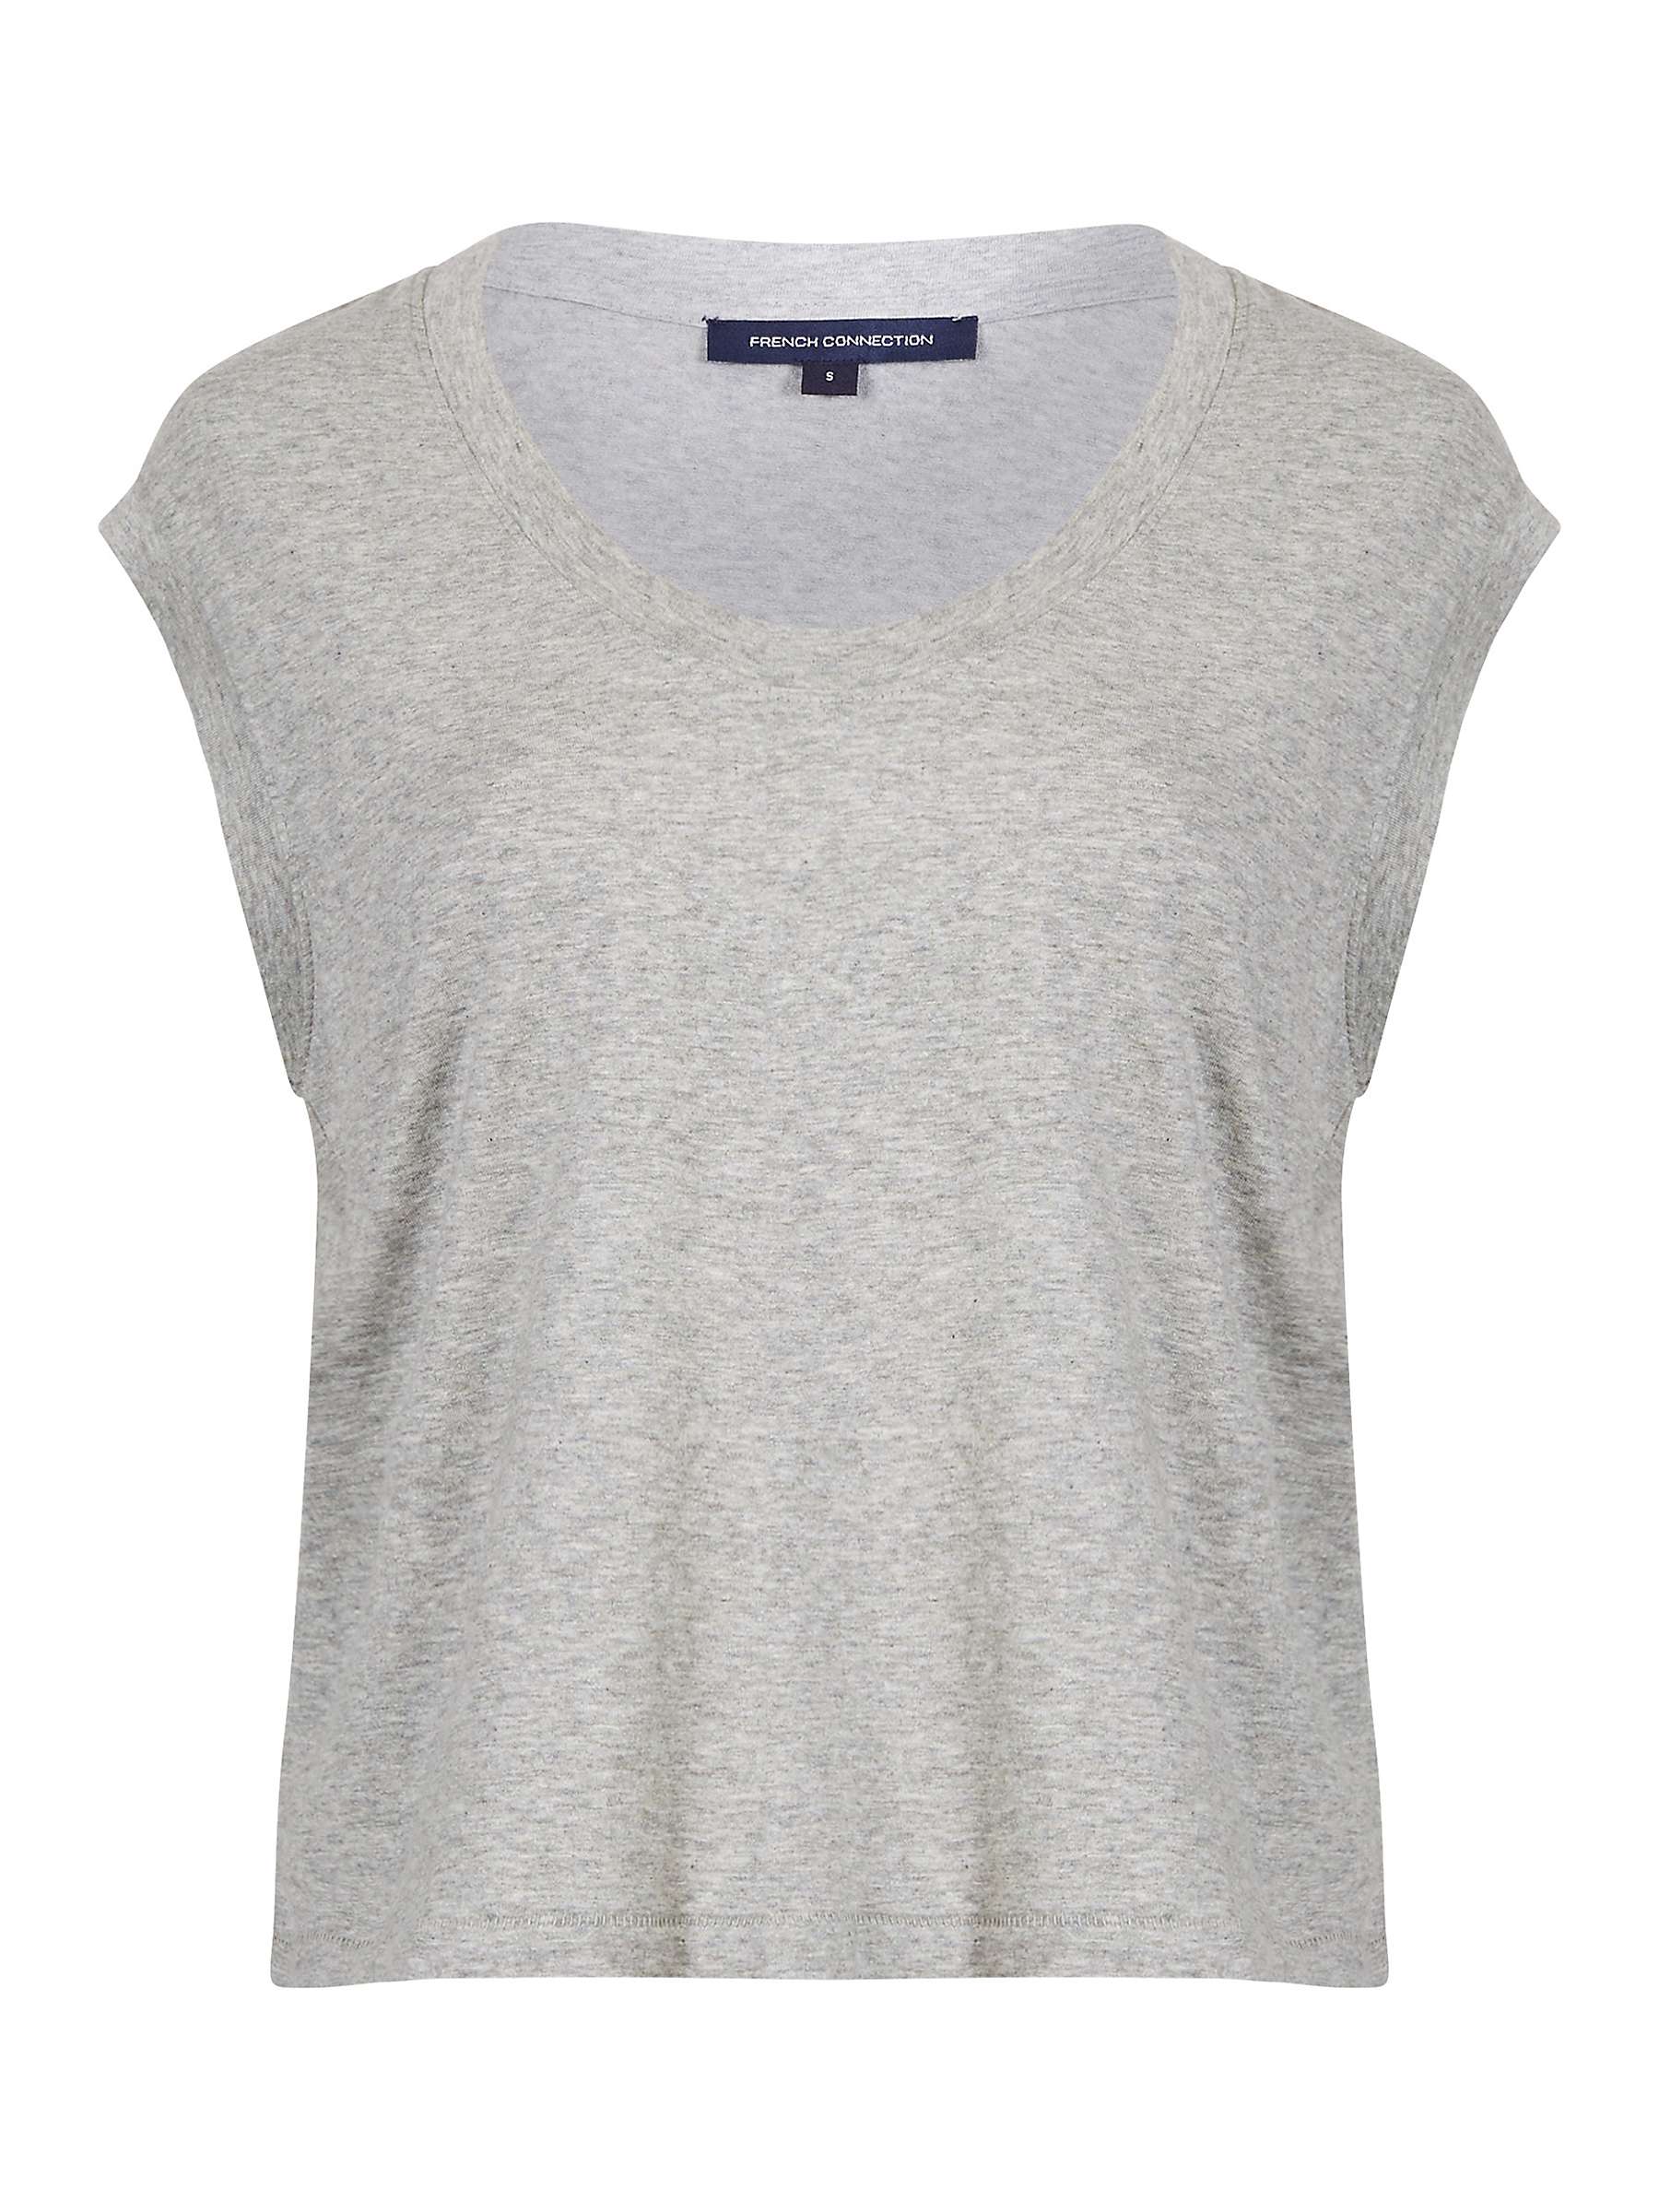 Buy French Connection Perinne Organic Cotton T-Shirt Online at johnlewis.com